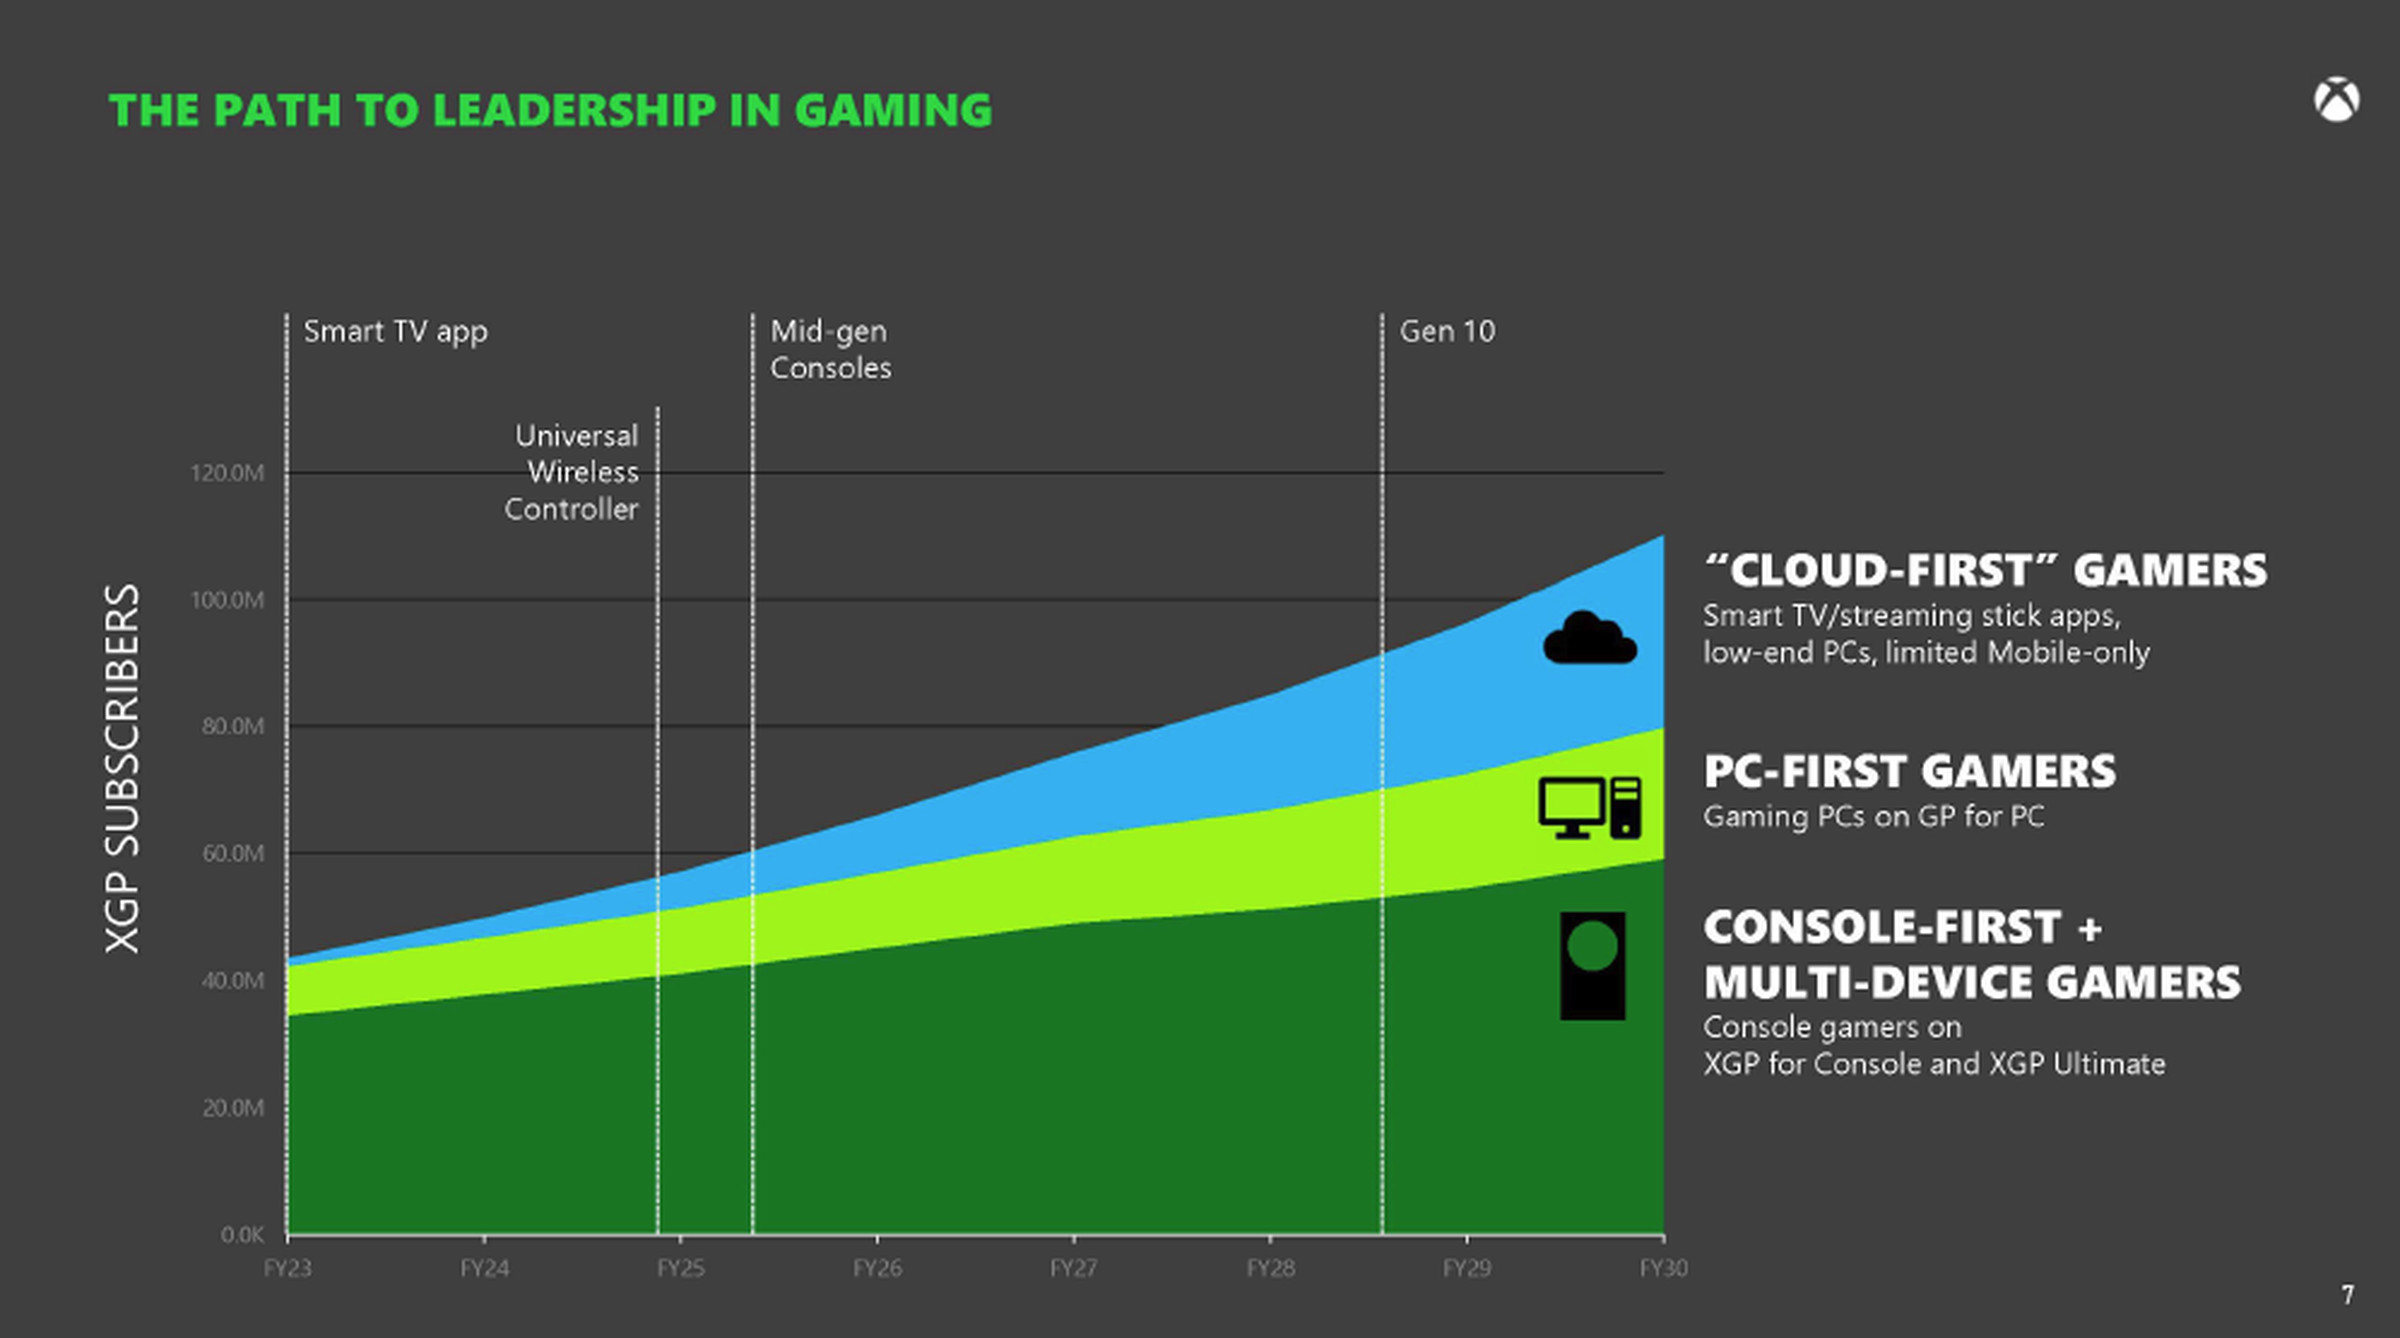 Microsoft increasingly sees “cloud-first” gaming as important.